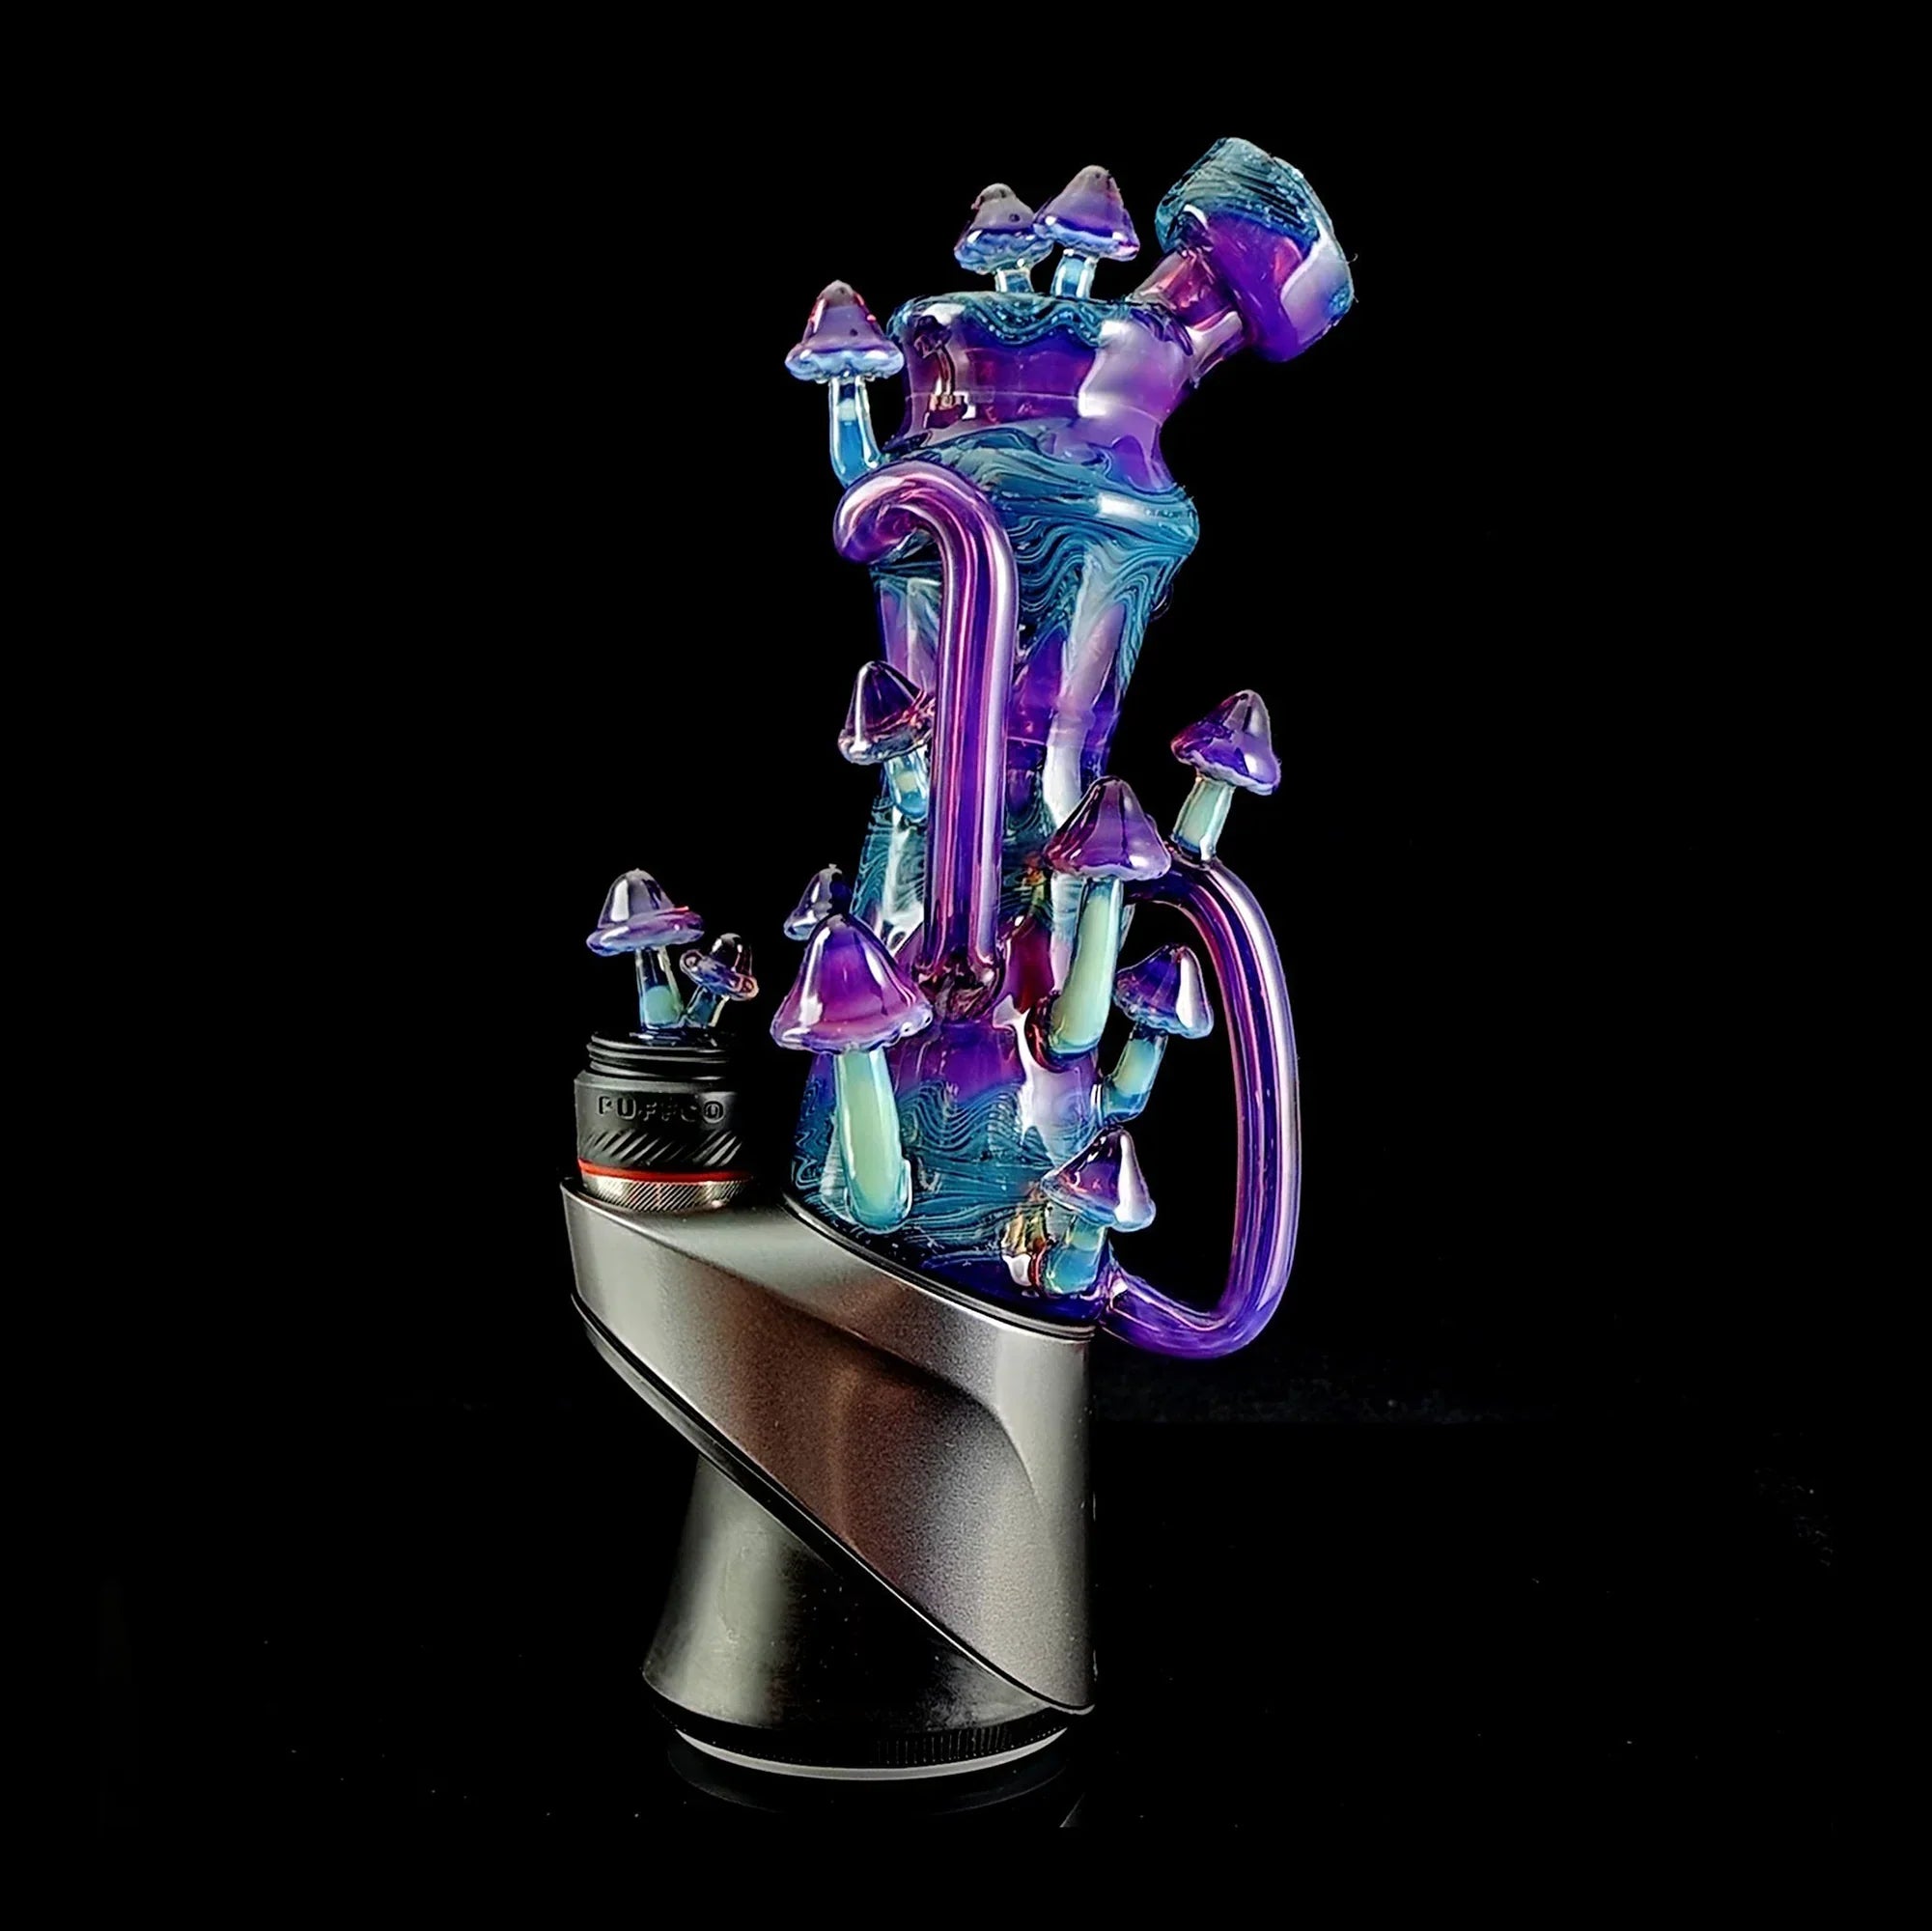 OTG Glass Bender Puffco Peak or Peak Pro top by Old Town Glass